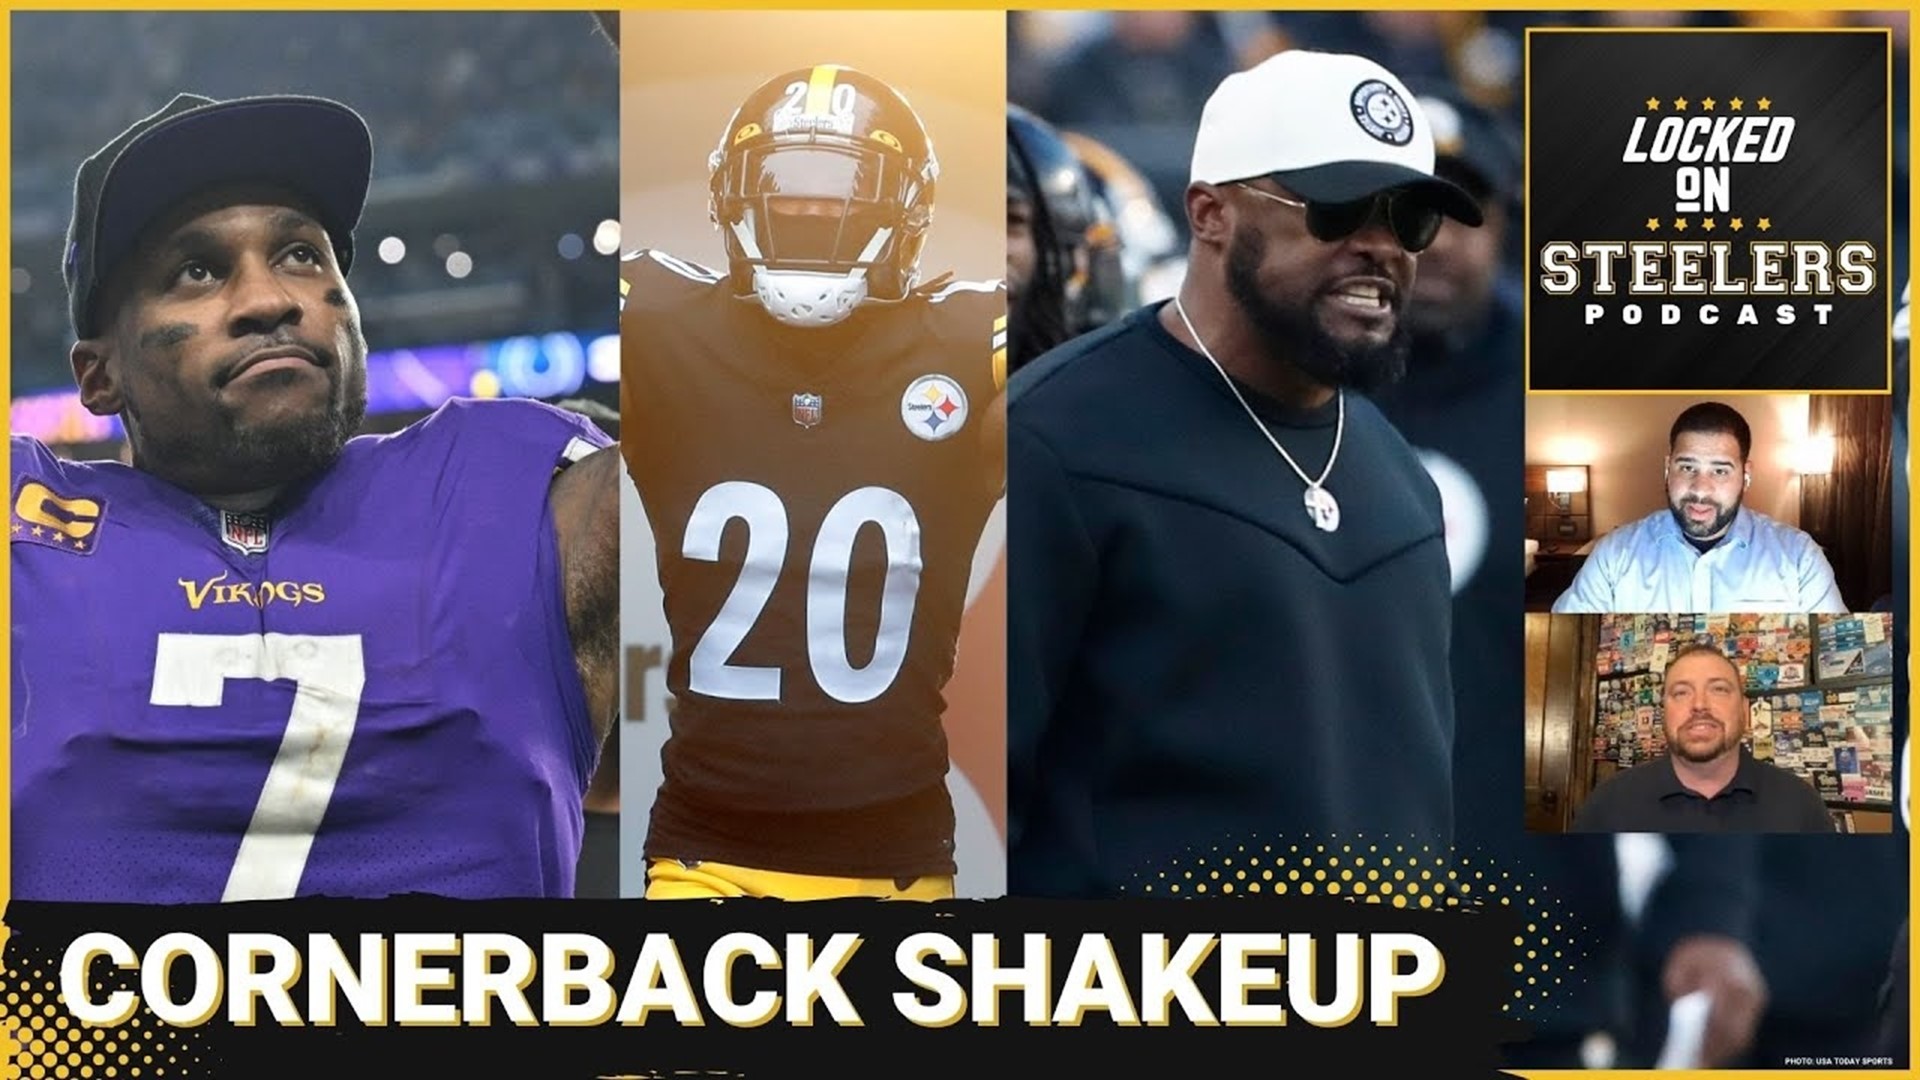 The Pittsburgh Steelers hade a cornerback shakeup to open free agency by gaining Patrick Peterson and losing Cameron Sutton.